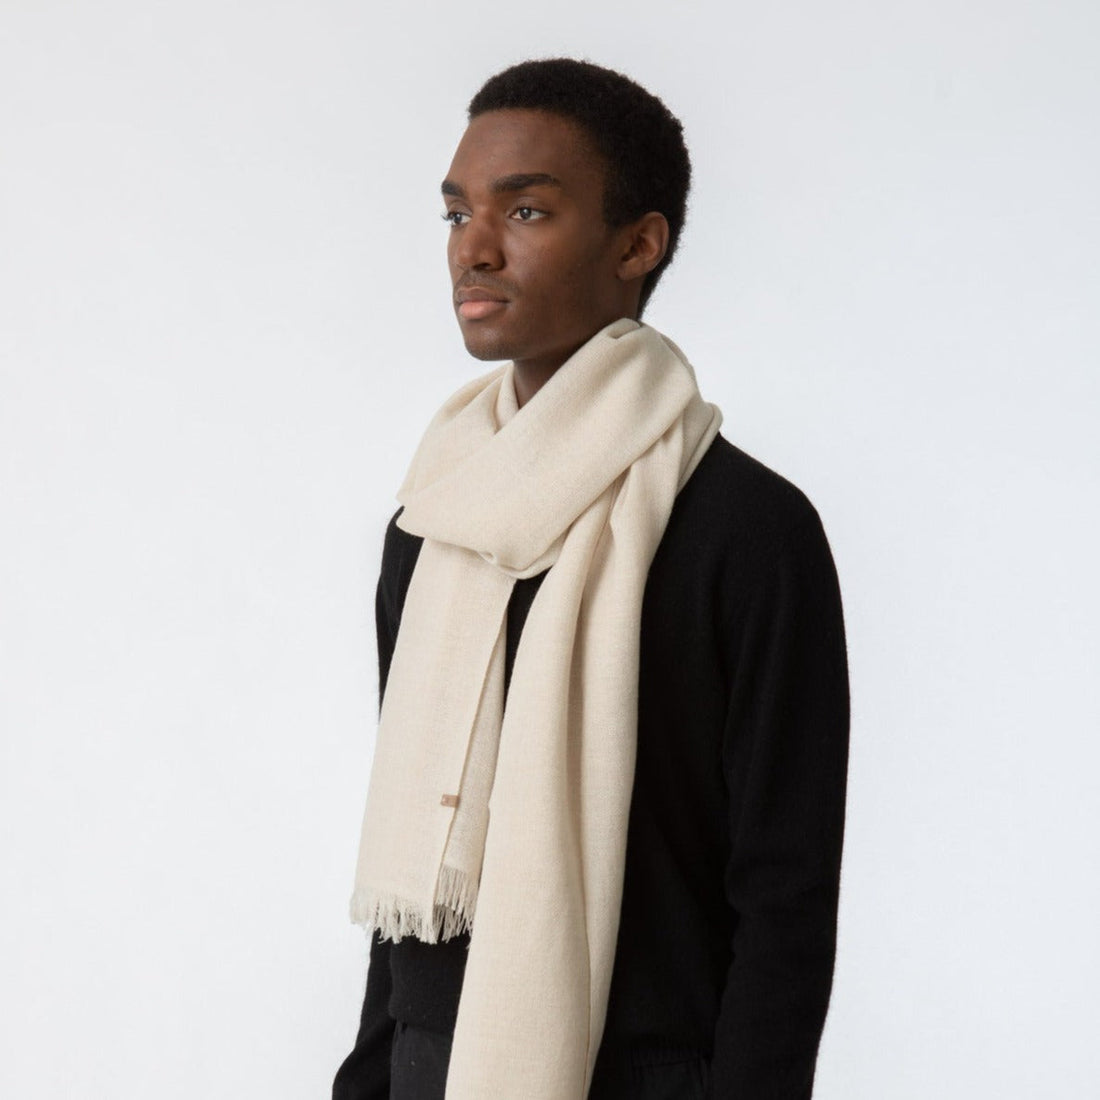 Scarves fair trade ethical sustainable fashion Woven Wool Scarves in Neutrals conscious purchase Dinadi